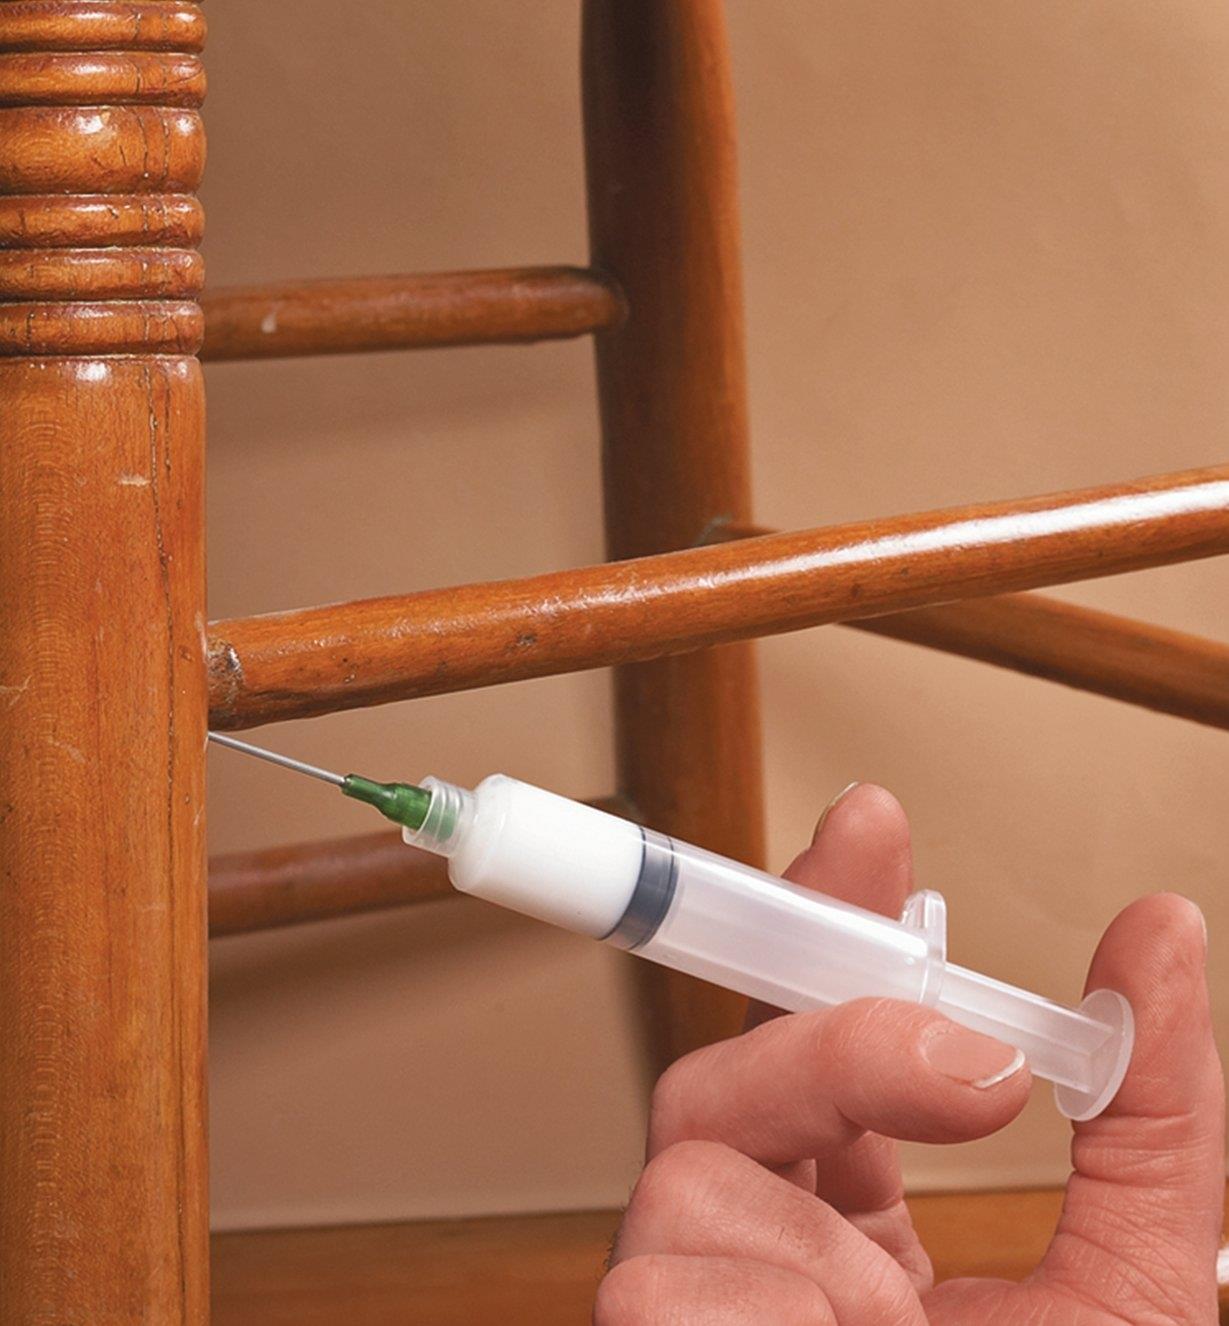 Injecting glue into a chair joint with a syringe